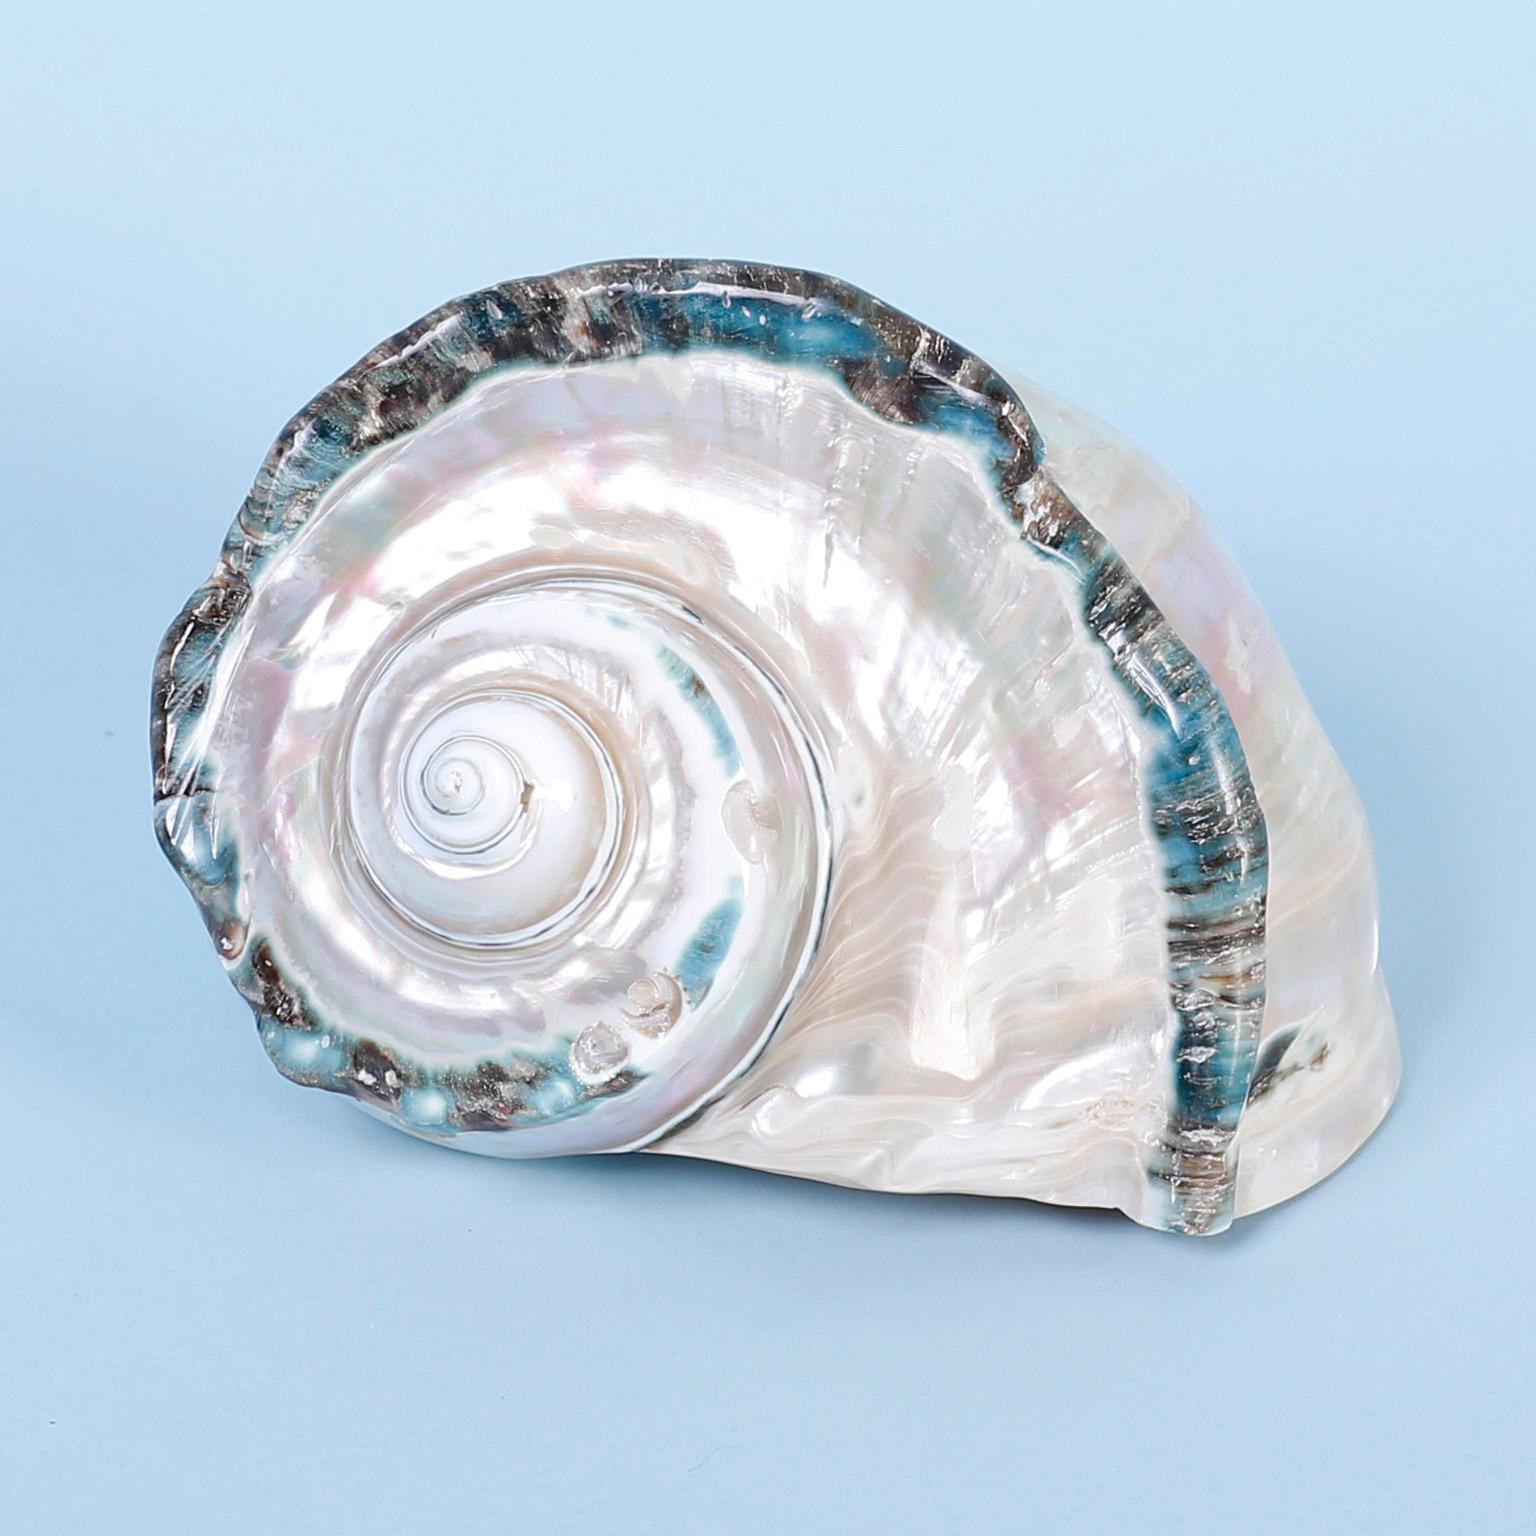 Brilliant example of a turbo marmoratus seashell in the spiraling form of Mother Nature’s sacred geometry with opalescent whites and tints outlined in iridescent blues.